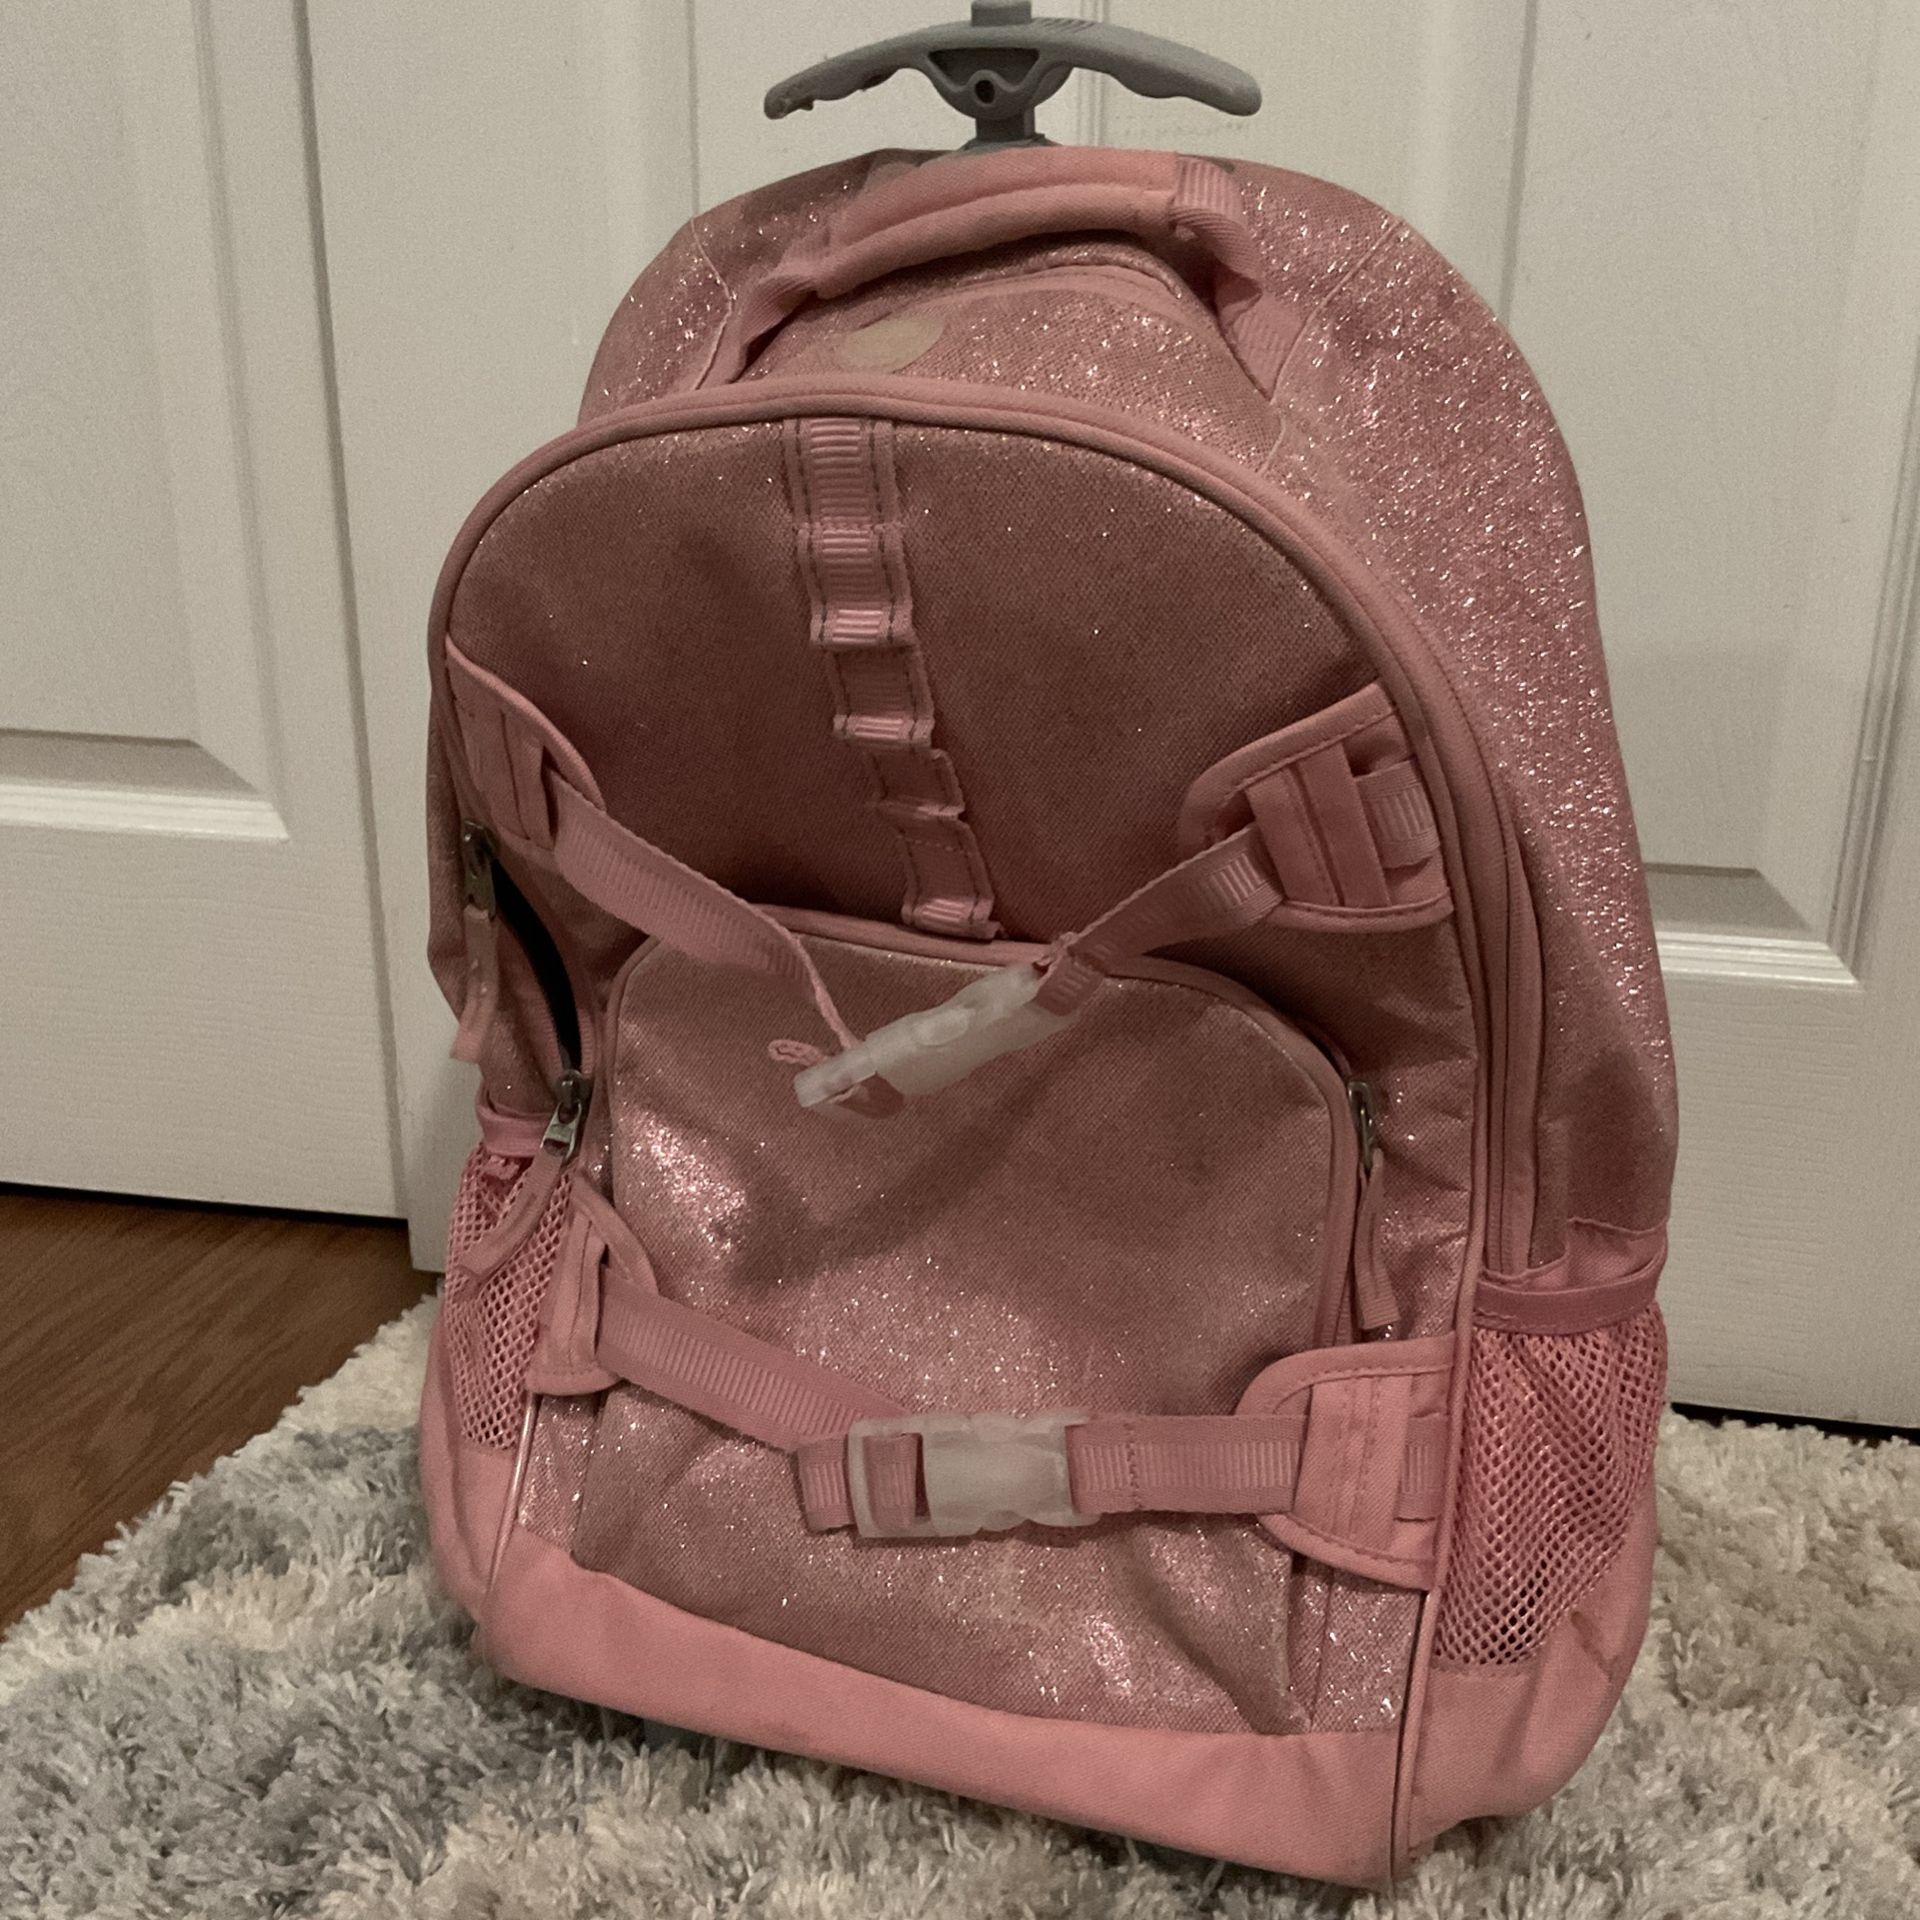 Used, Pottery Barn Kids Pink Glitter Backpack 